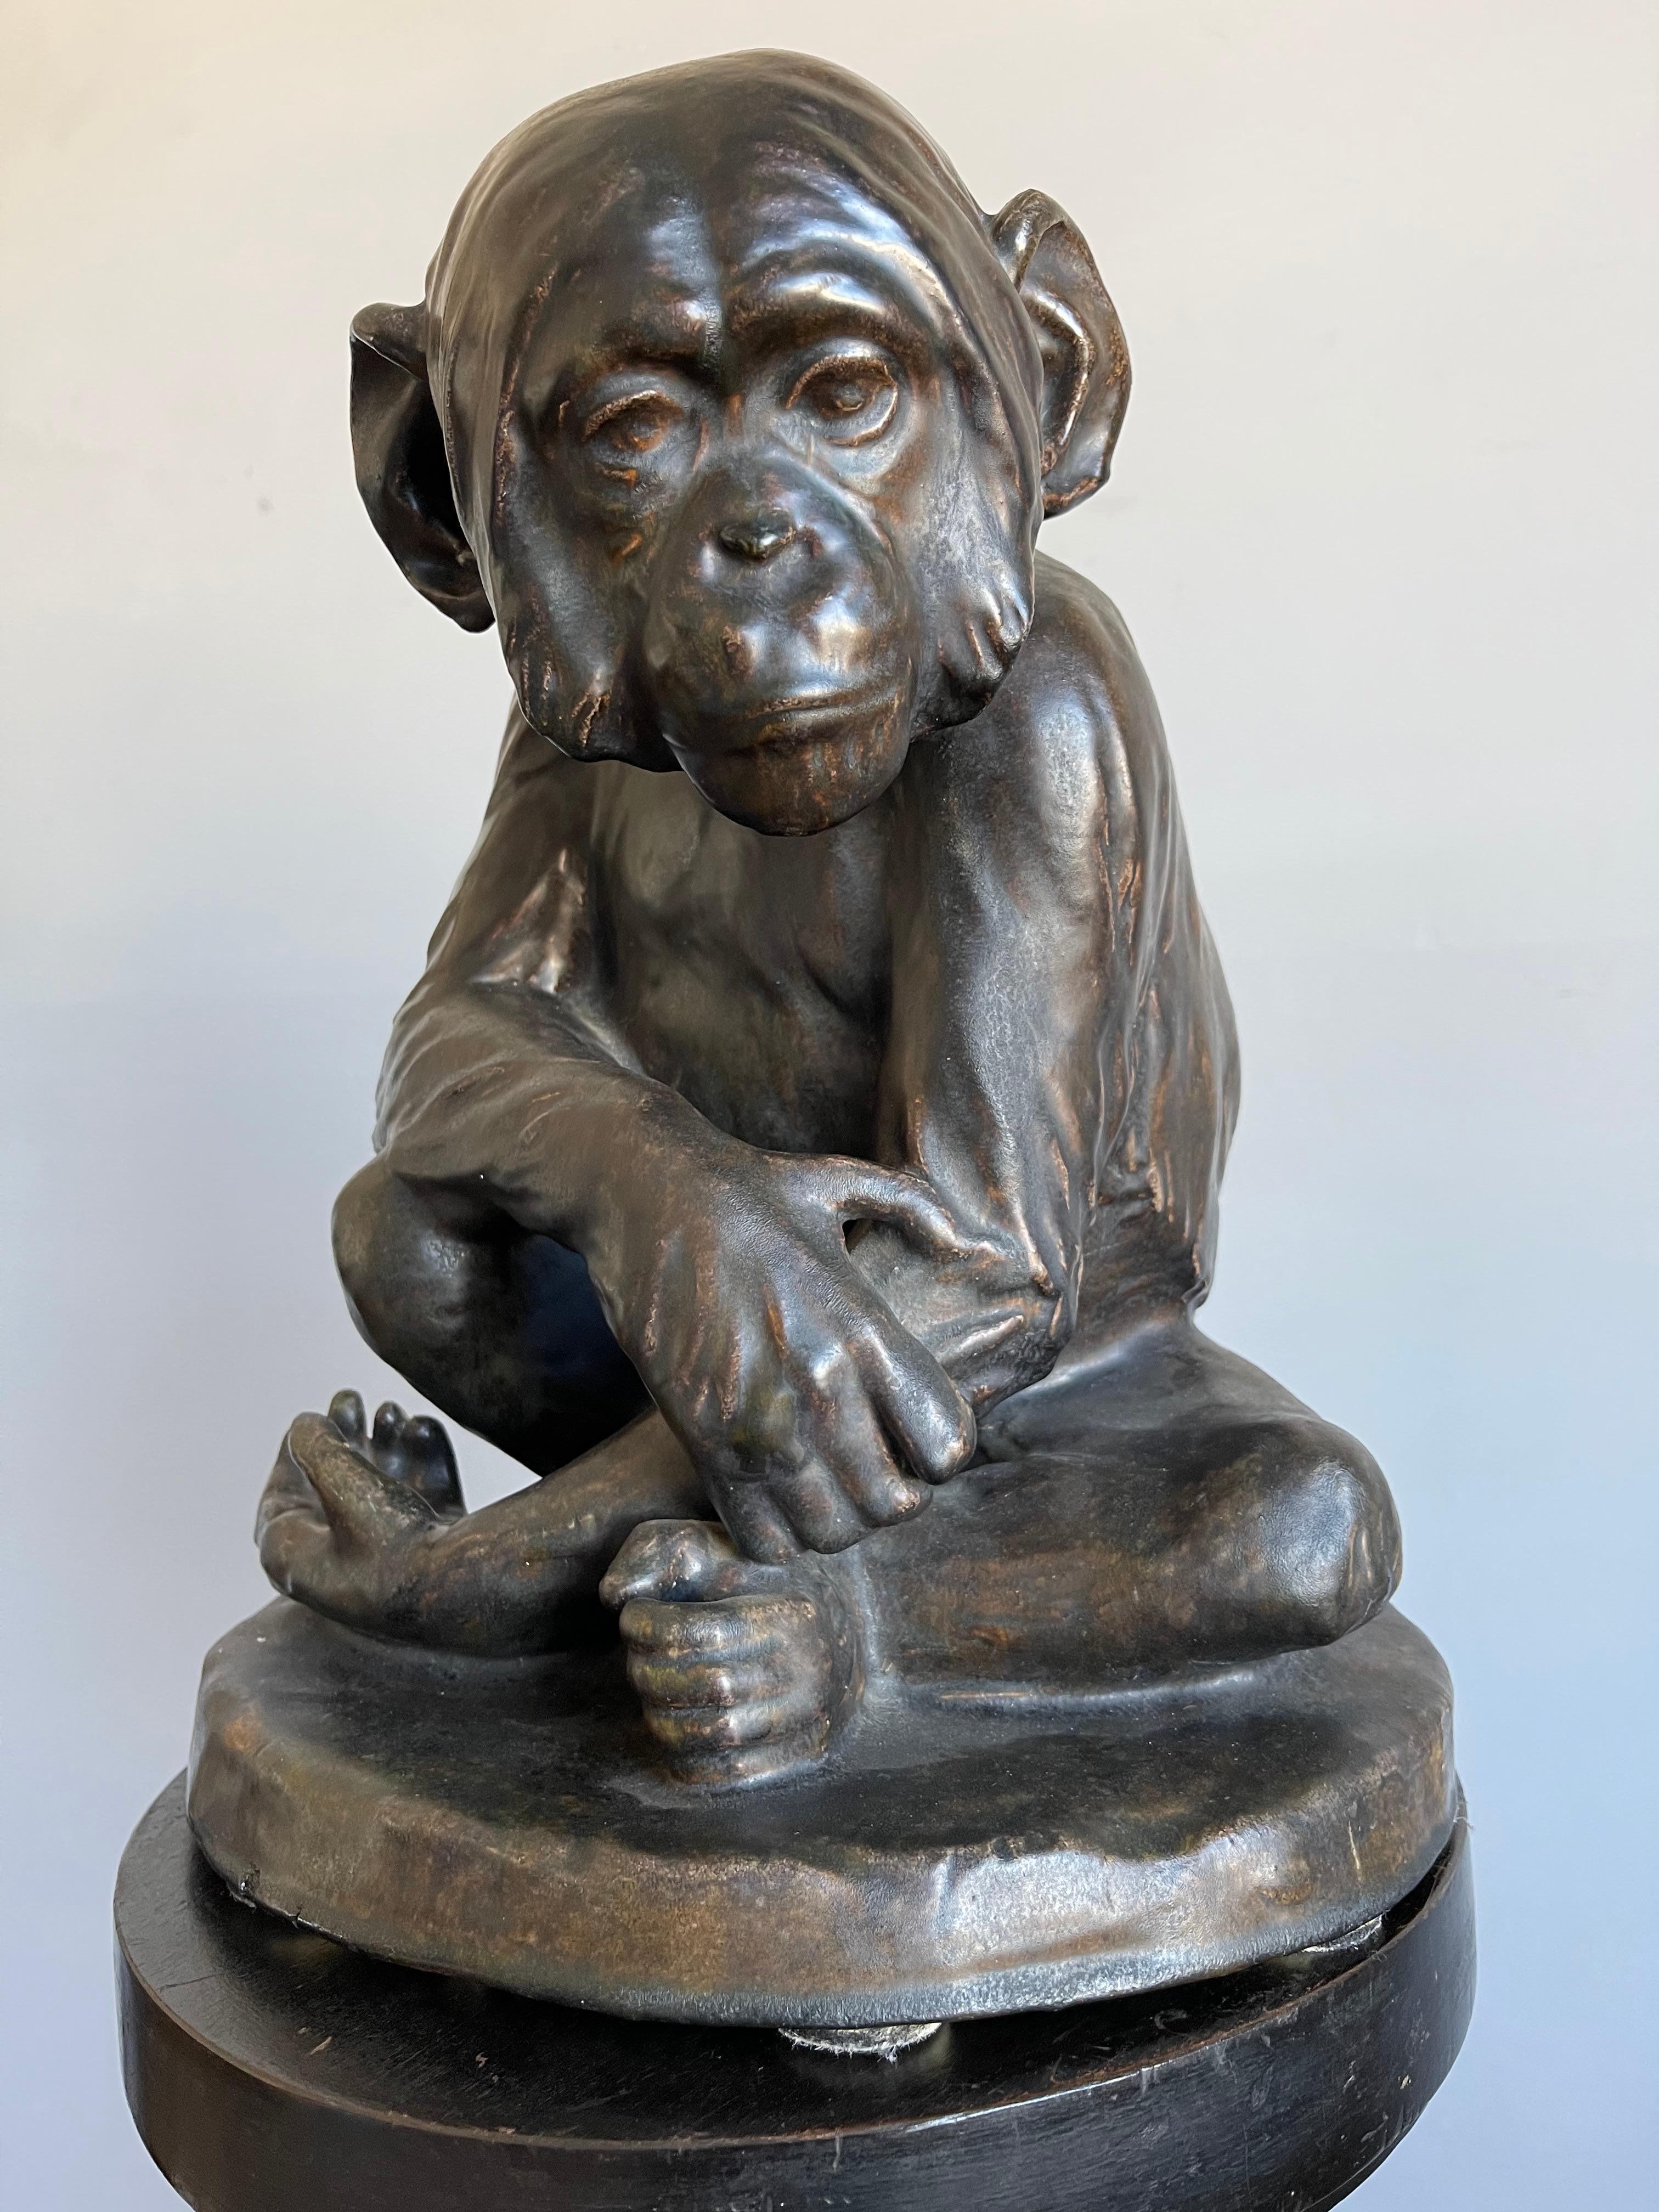 Wonderful and large original antique sculpture of a beautiful chimpanzee / ape.

Over the years we have owned and sold a fair number of beautiful quality sculptures in all kinds of materials, but we never had the pleasure of offering a sculpture as